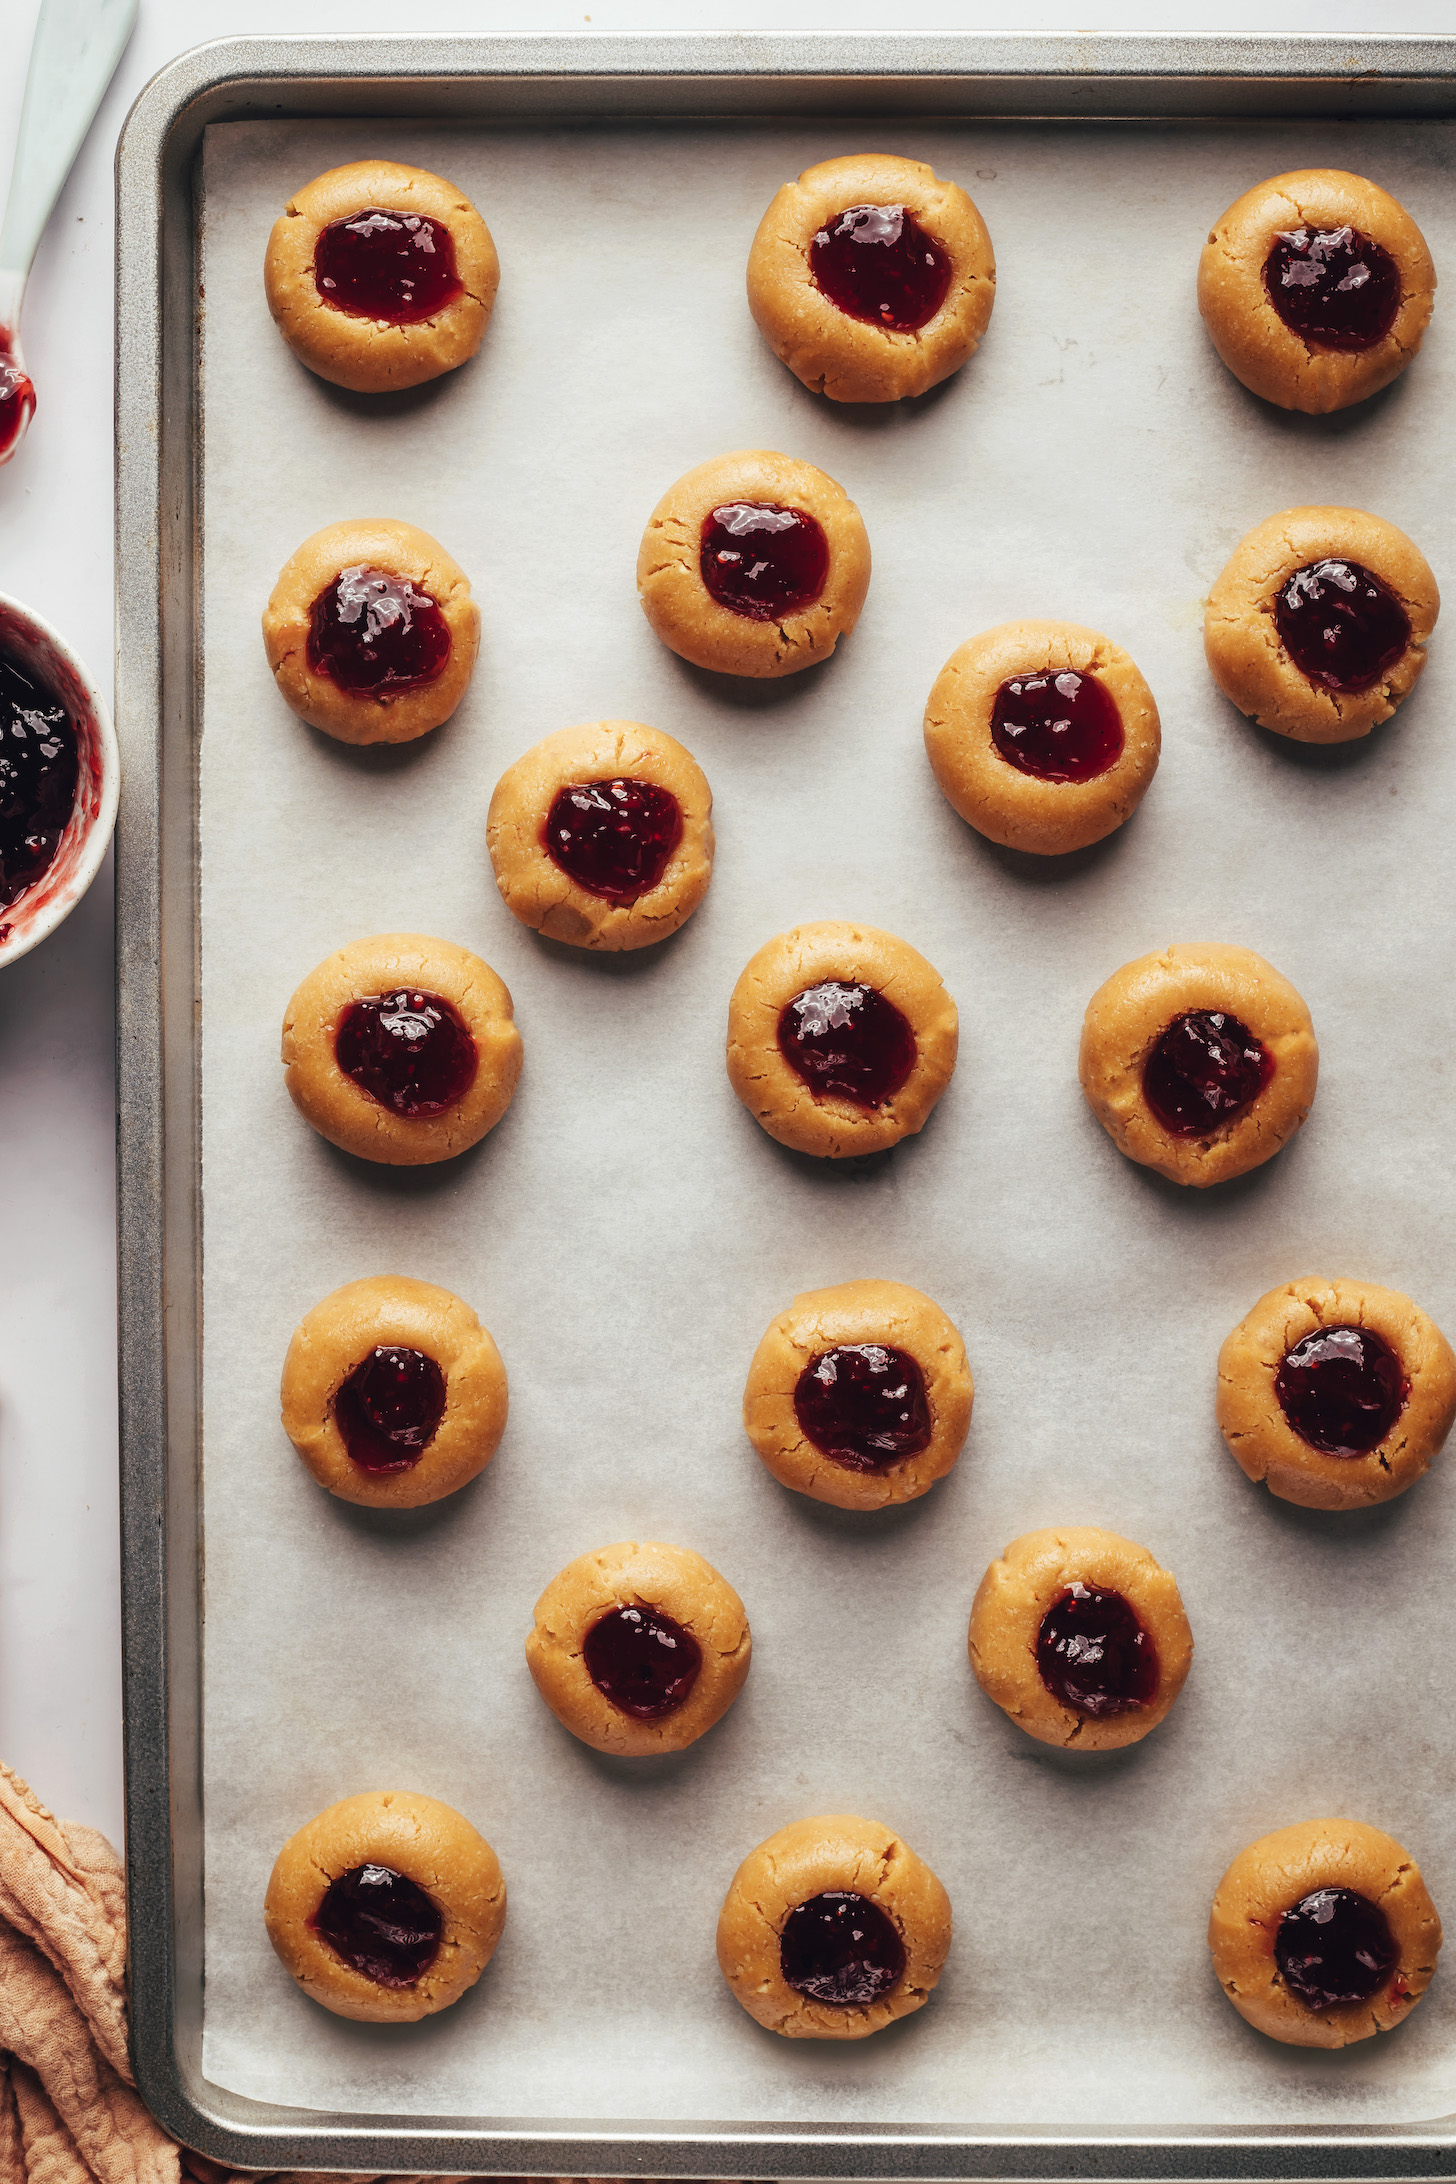 By pressing the centers of dollops of jam inside the peanut butter dough